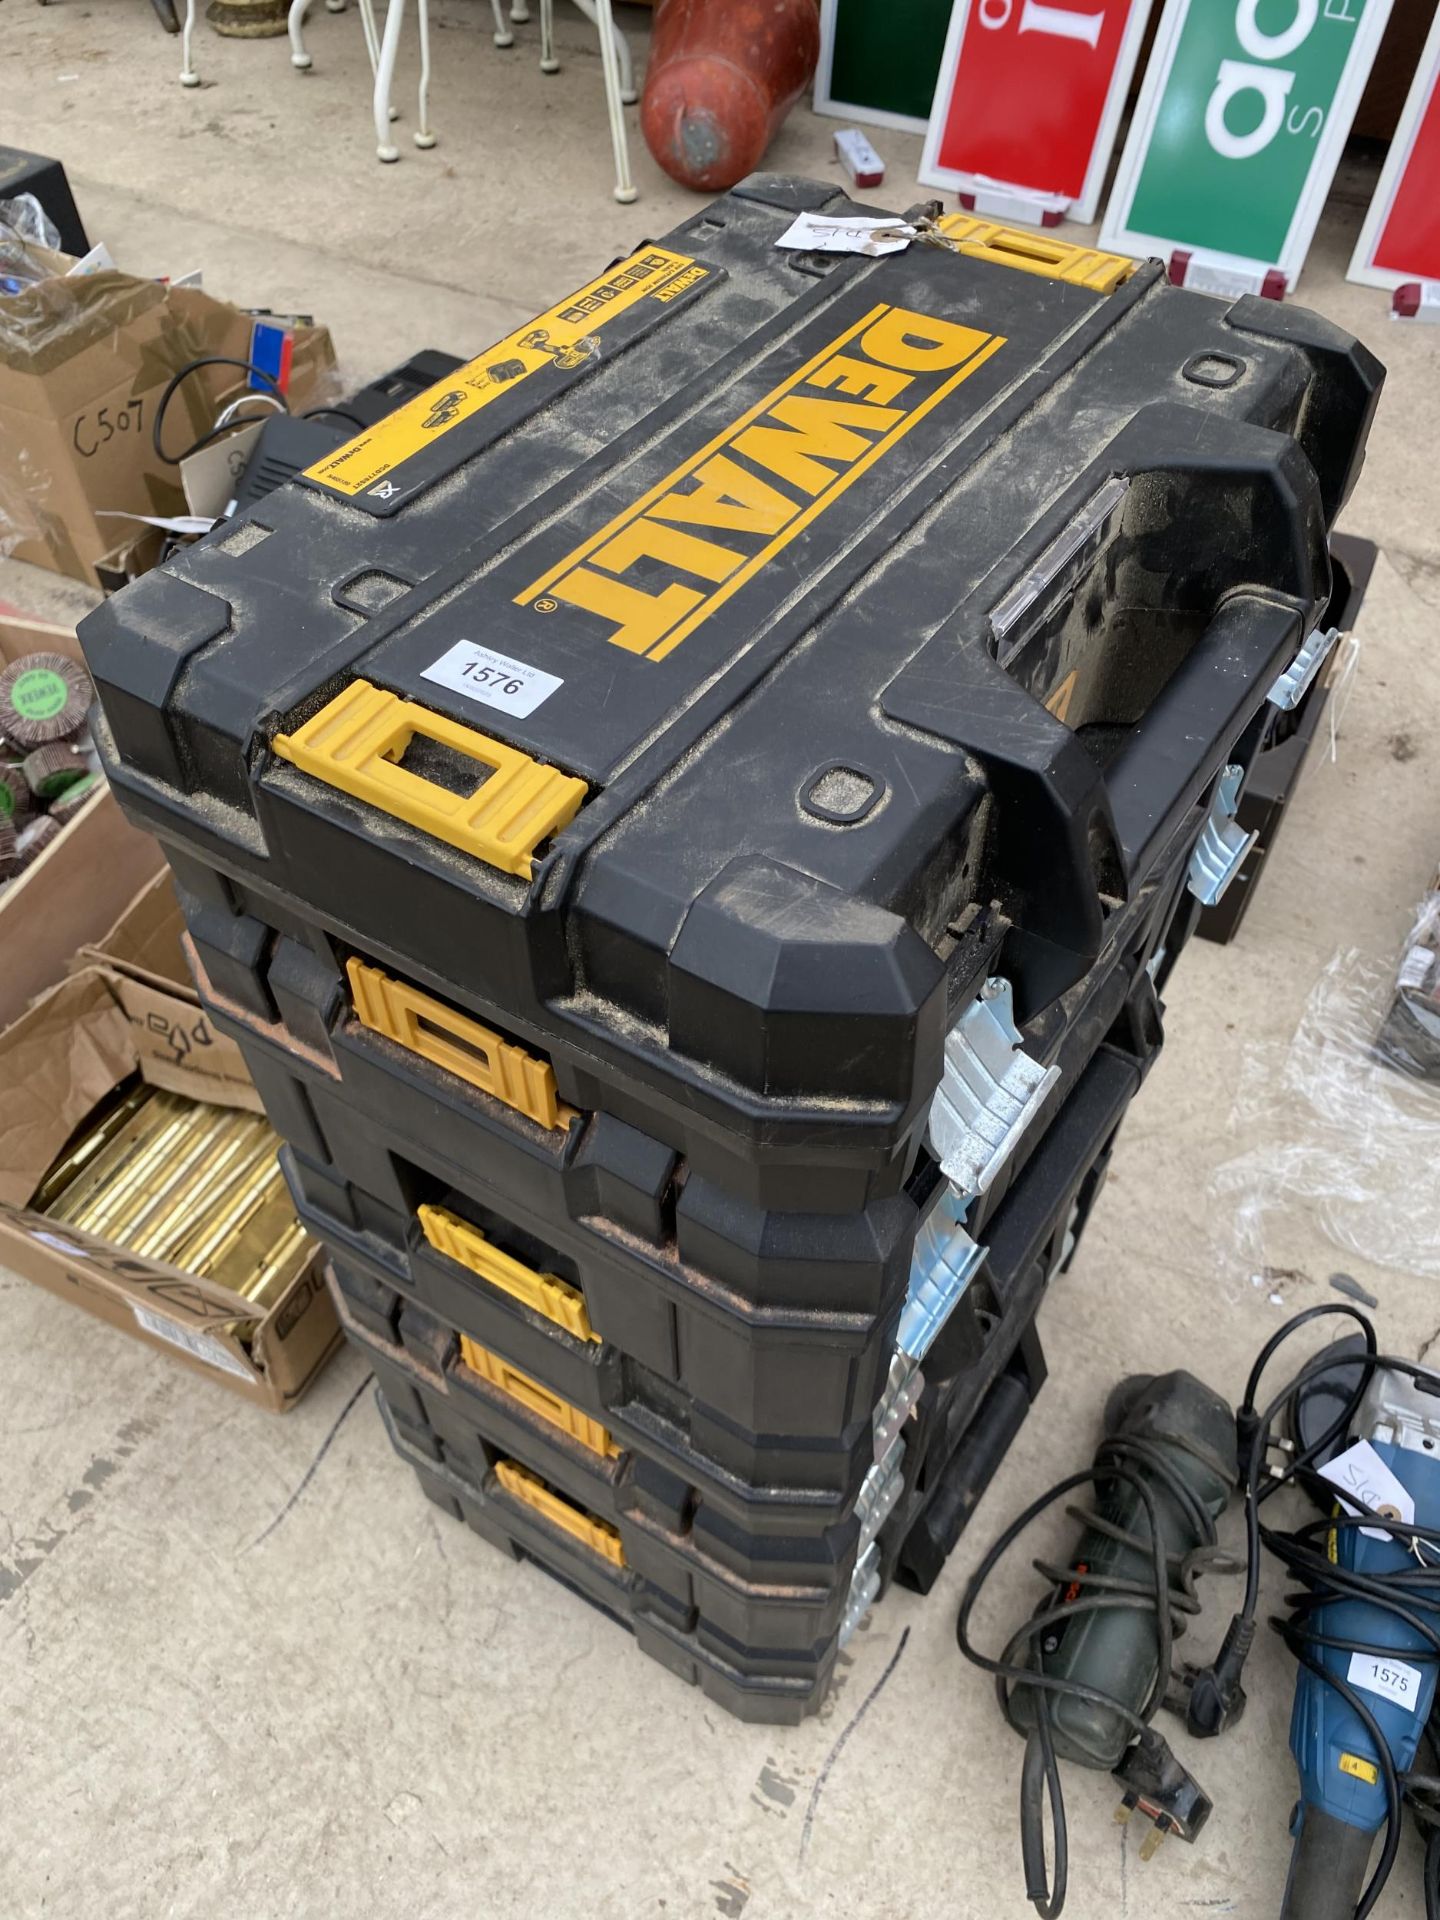 FIVE EMPTY DEWALT STACKING DRILL BOXES